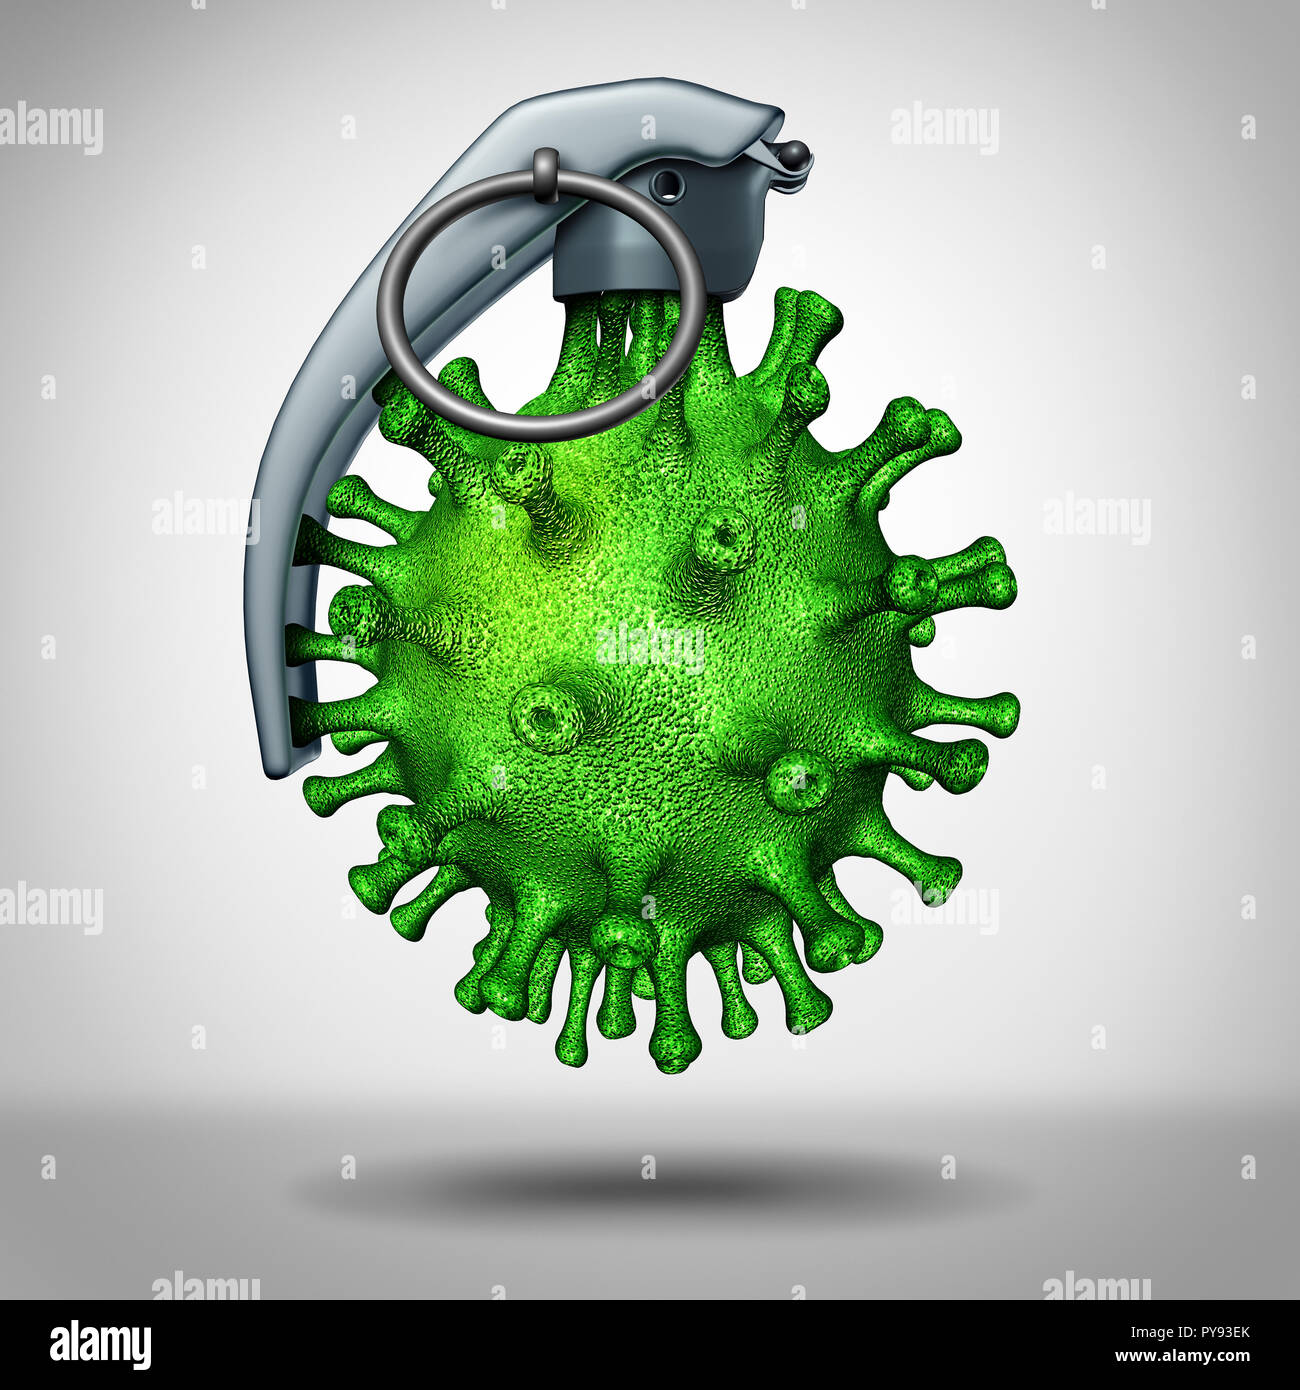 Virus bomb medical threat as a dangerous disease pathogen shapred as a hand grenade as an icon for the biological warfare and dangers. Stock Photo